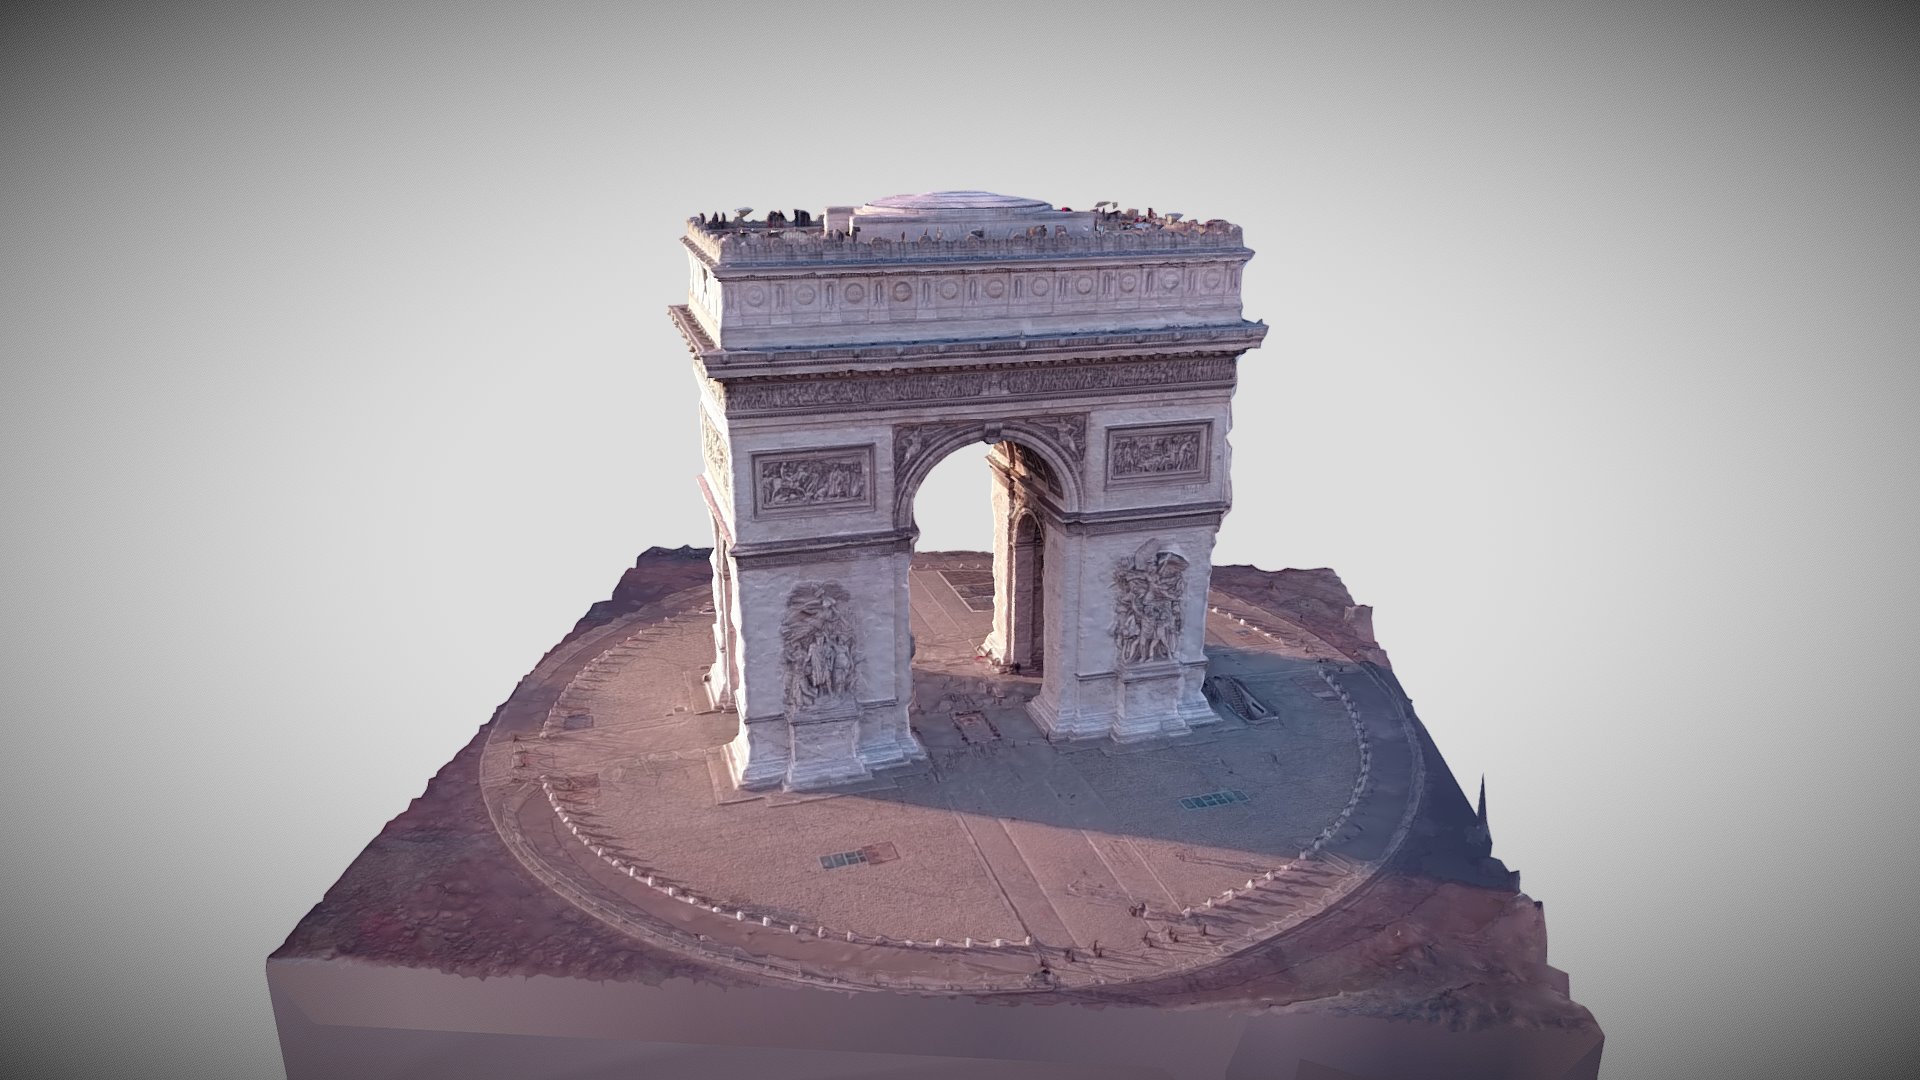 3D model Arc de Triomphe videogrammetry scan test - This is a 3D model of the Arc de Triomphe videogrammetry scan test. The 3D model is about a stone structure with a large archway.